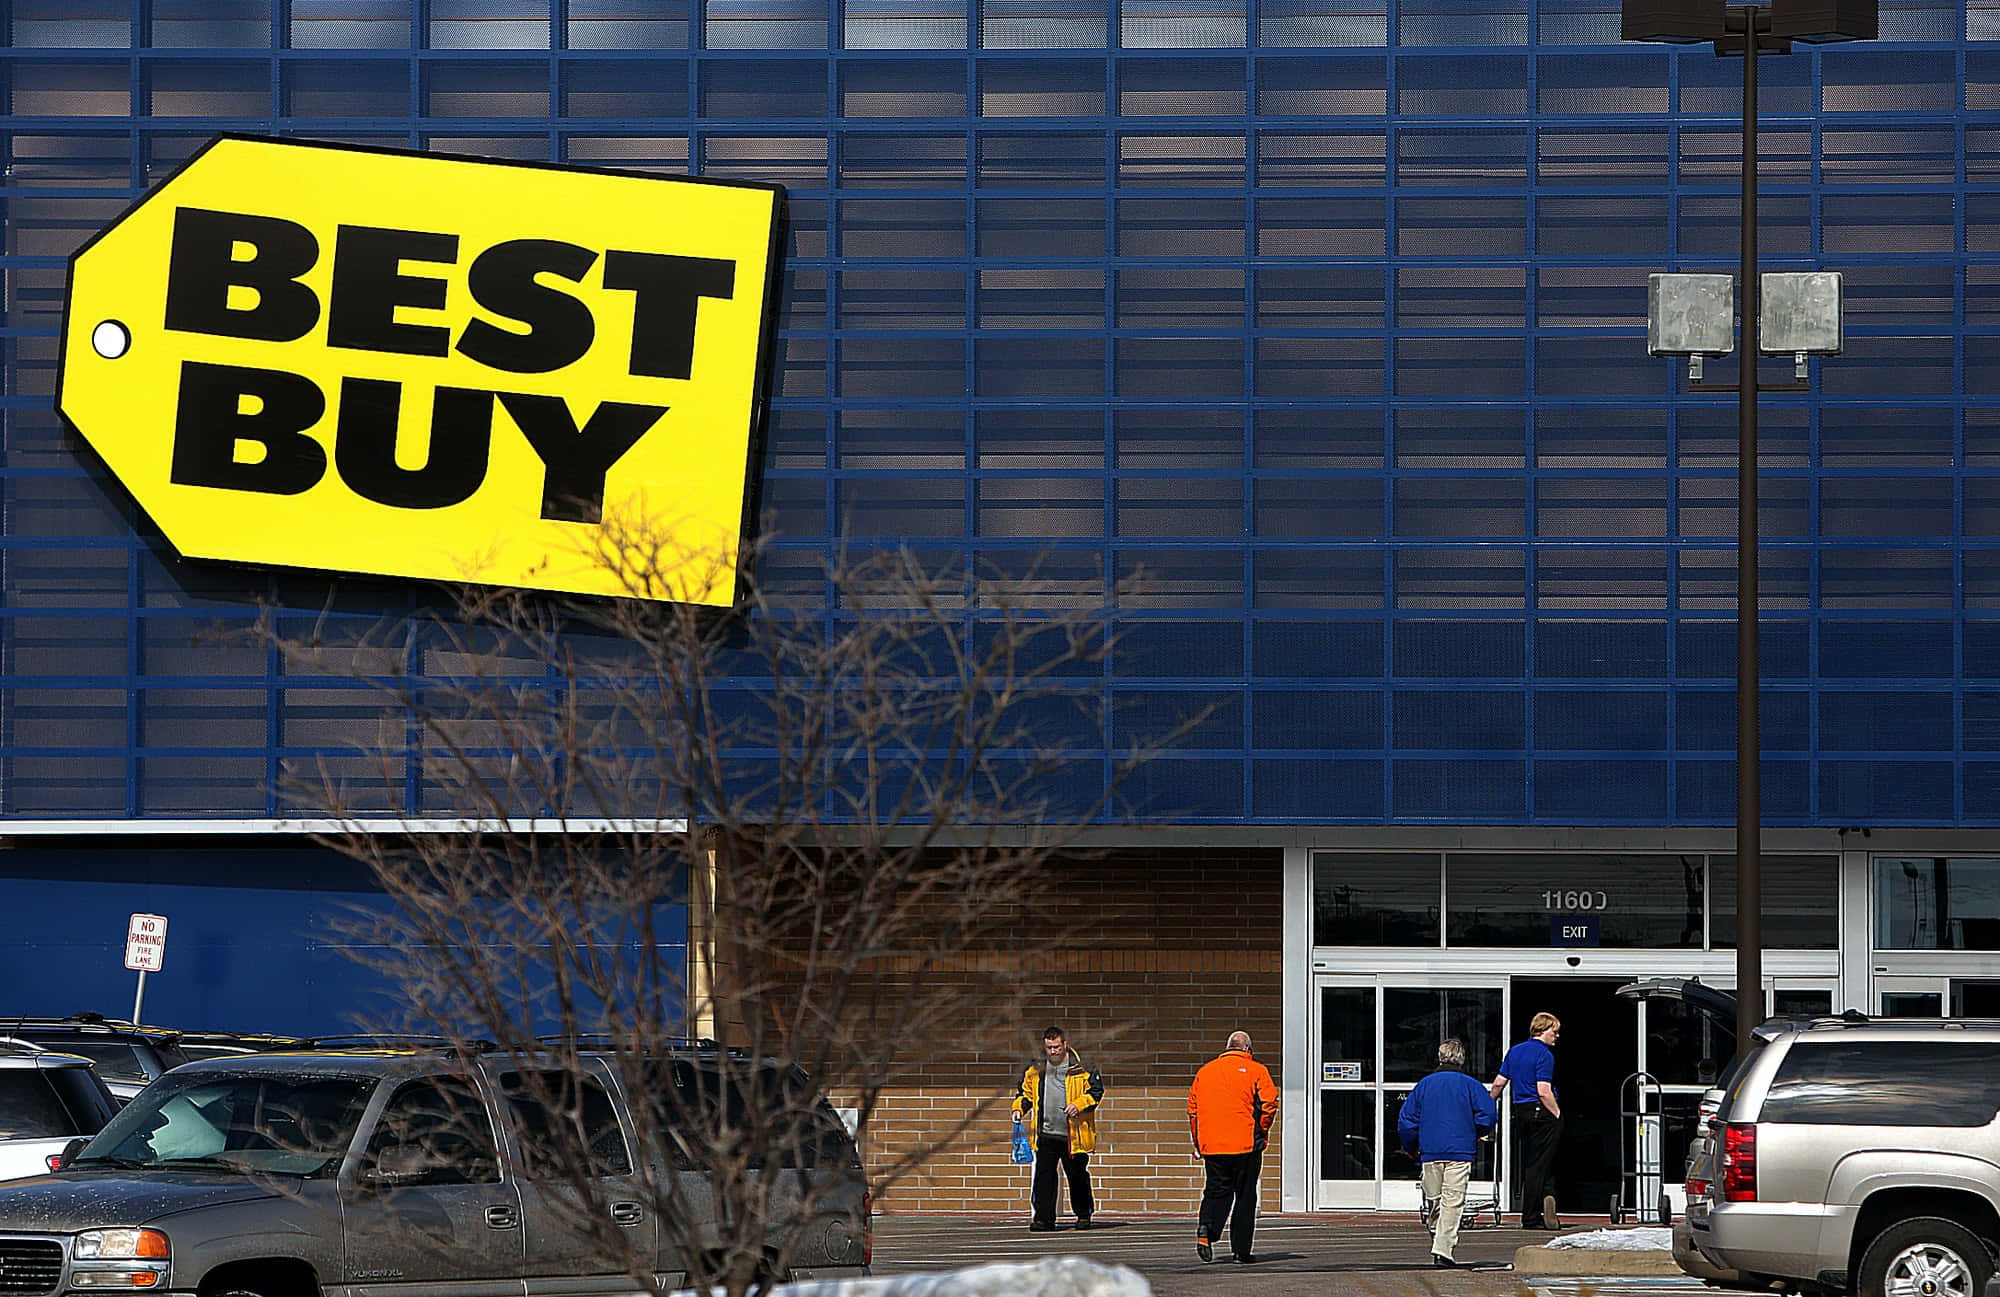 Find the tech you need at Best Buy